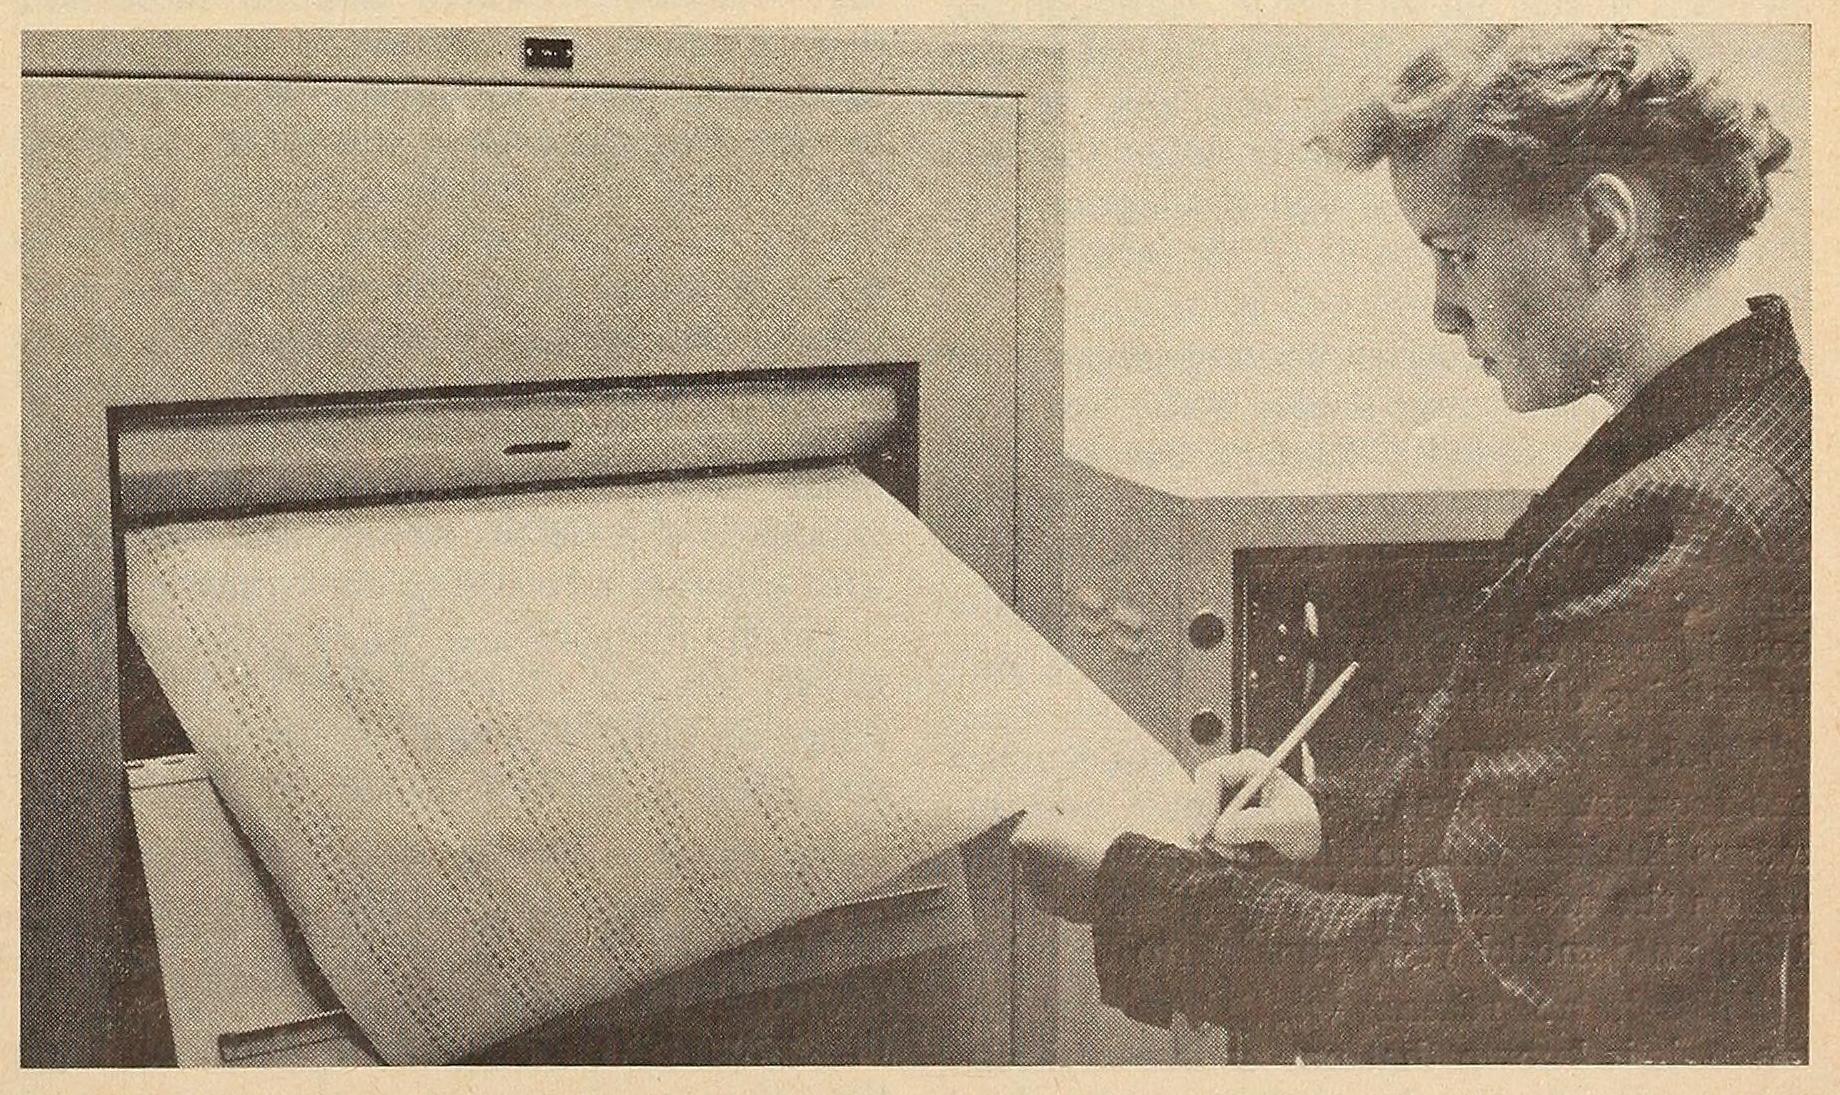 A black and white photograph of a woman standing at a large spool-feed printer. She is reading information off of a paper as it is being printed. The photo is scanned from a print magazine and appears slightly yellowed.